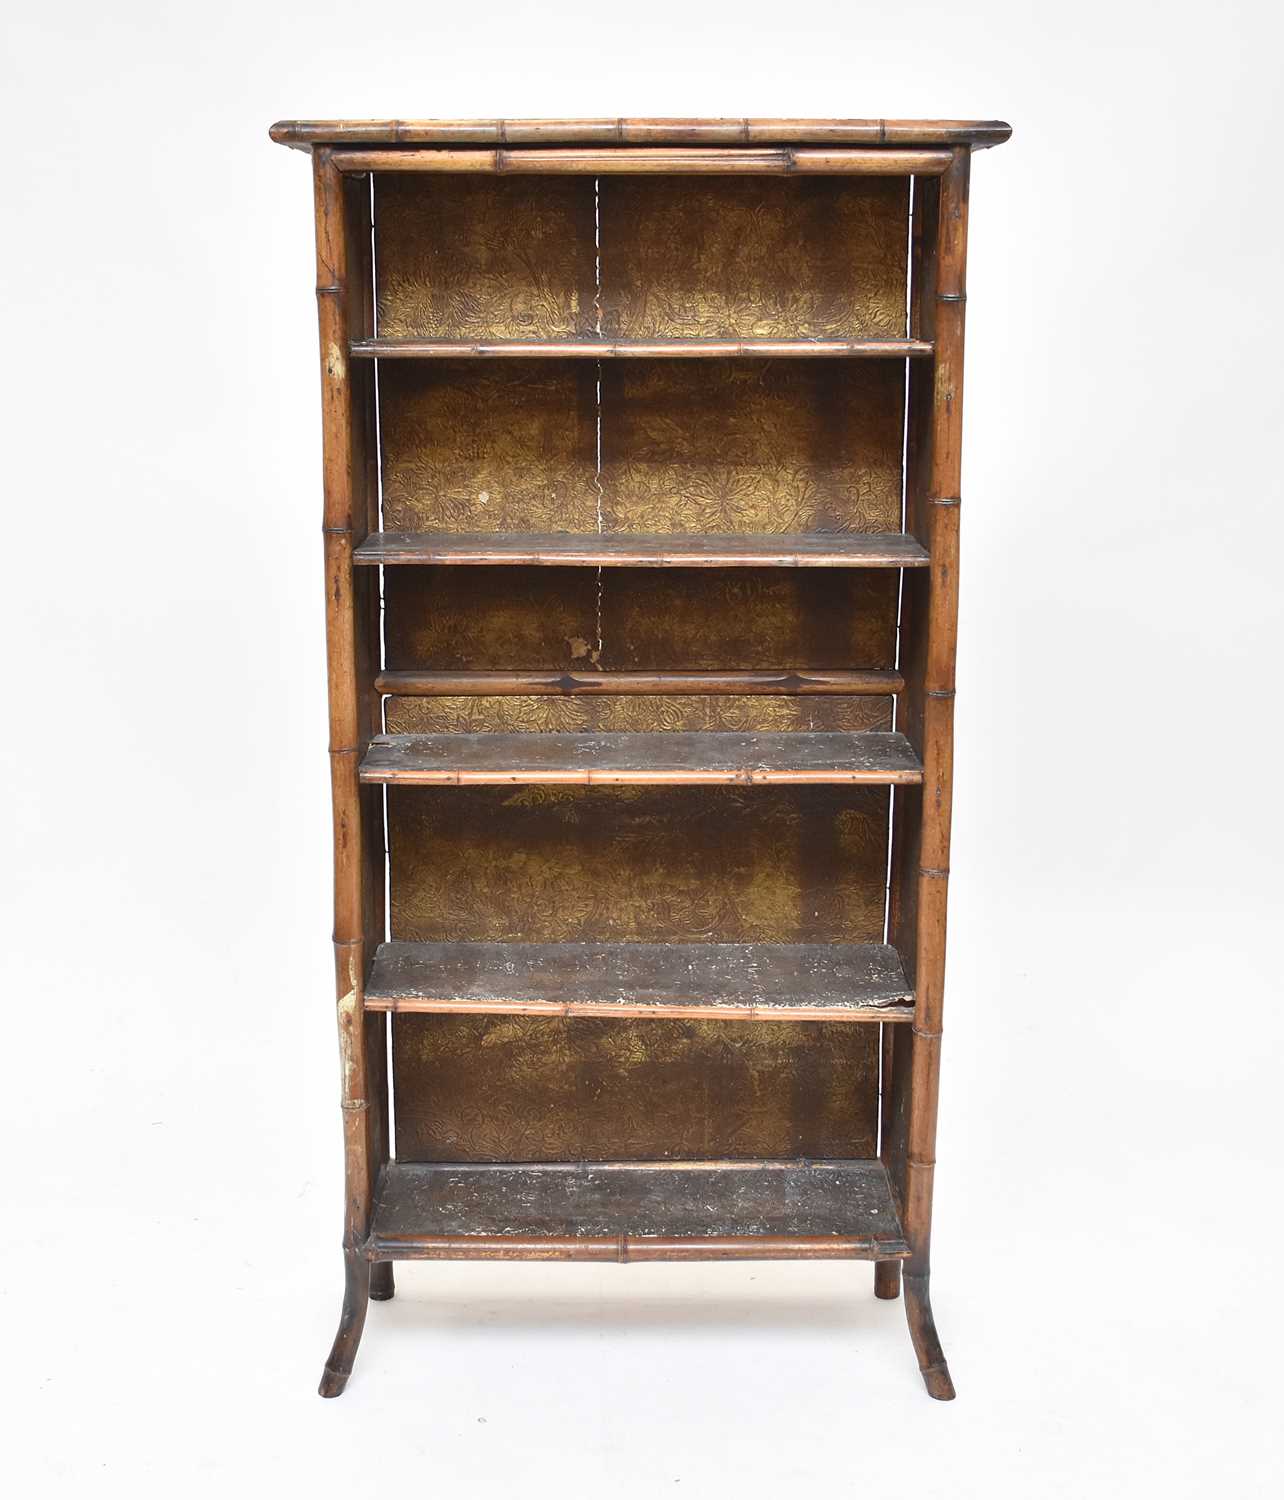 Lot 62 - A Victorian, Aesthetic period, bamboo framed, 5-tier bookcase